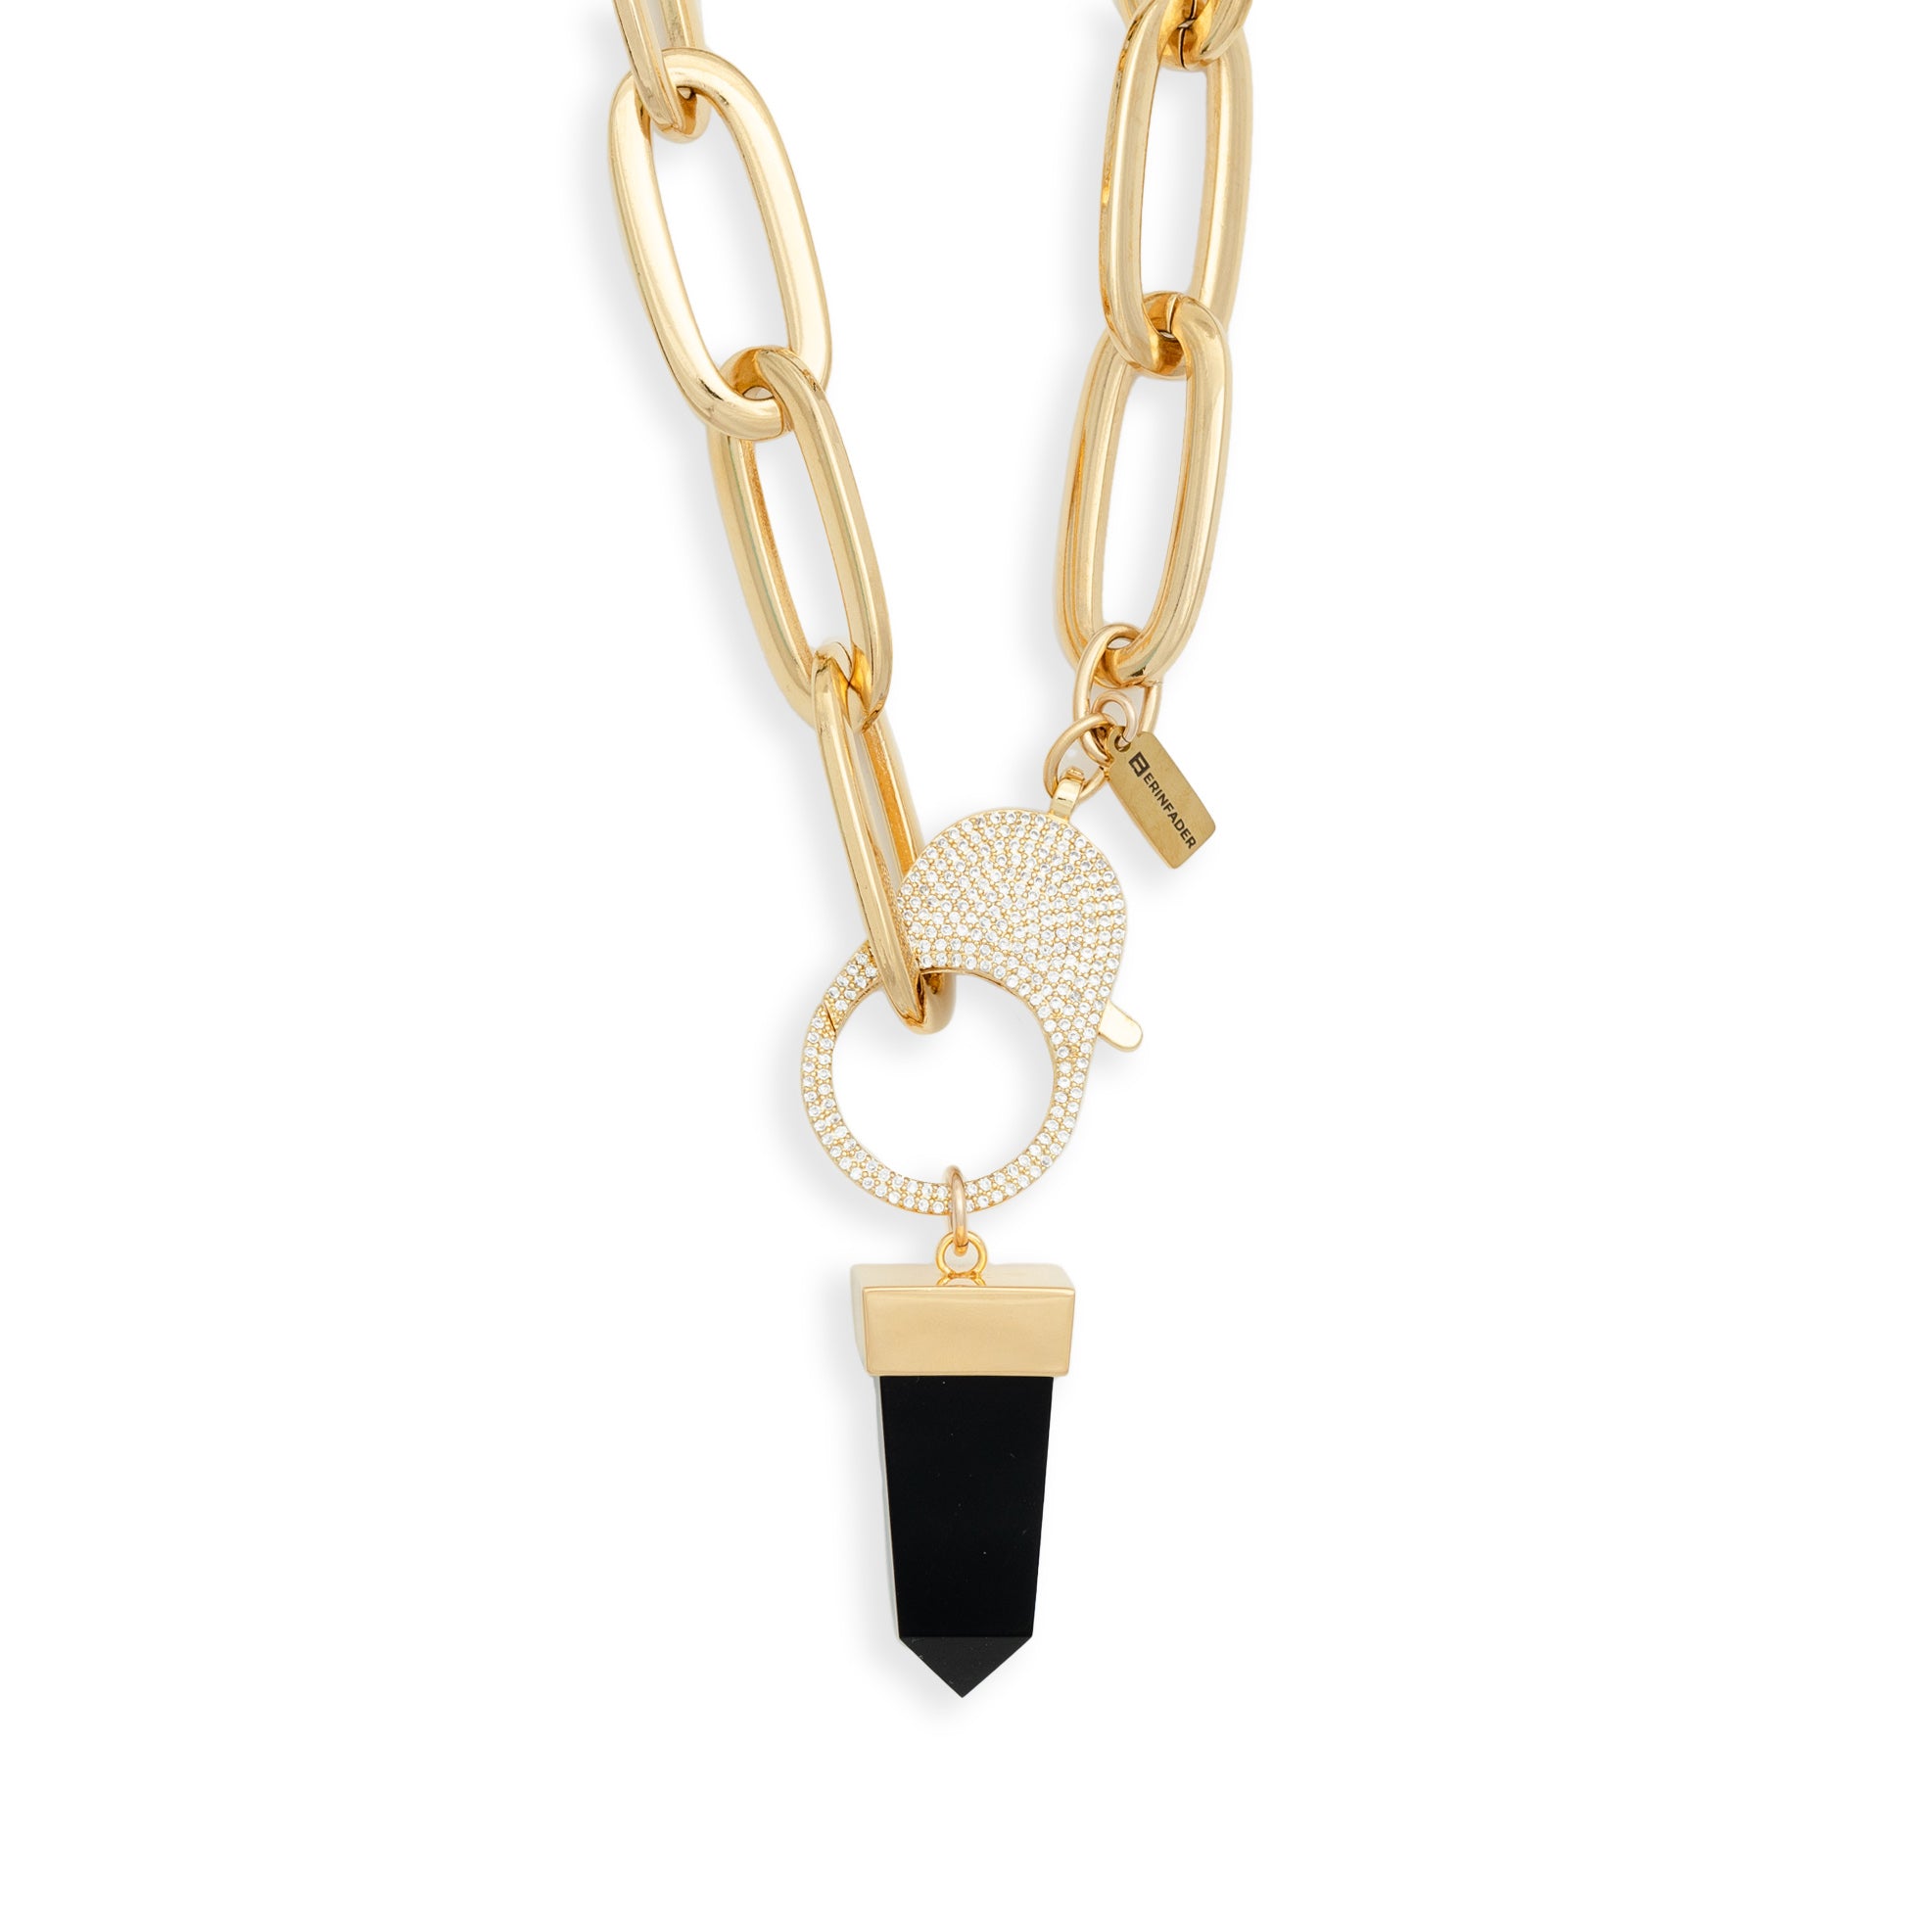 Gold Flex Choker with Onyx Pendant by Erin Fader Jewelry